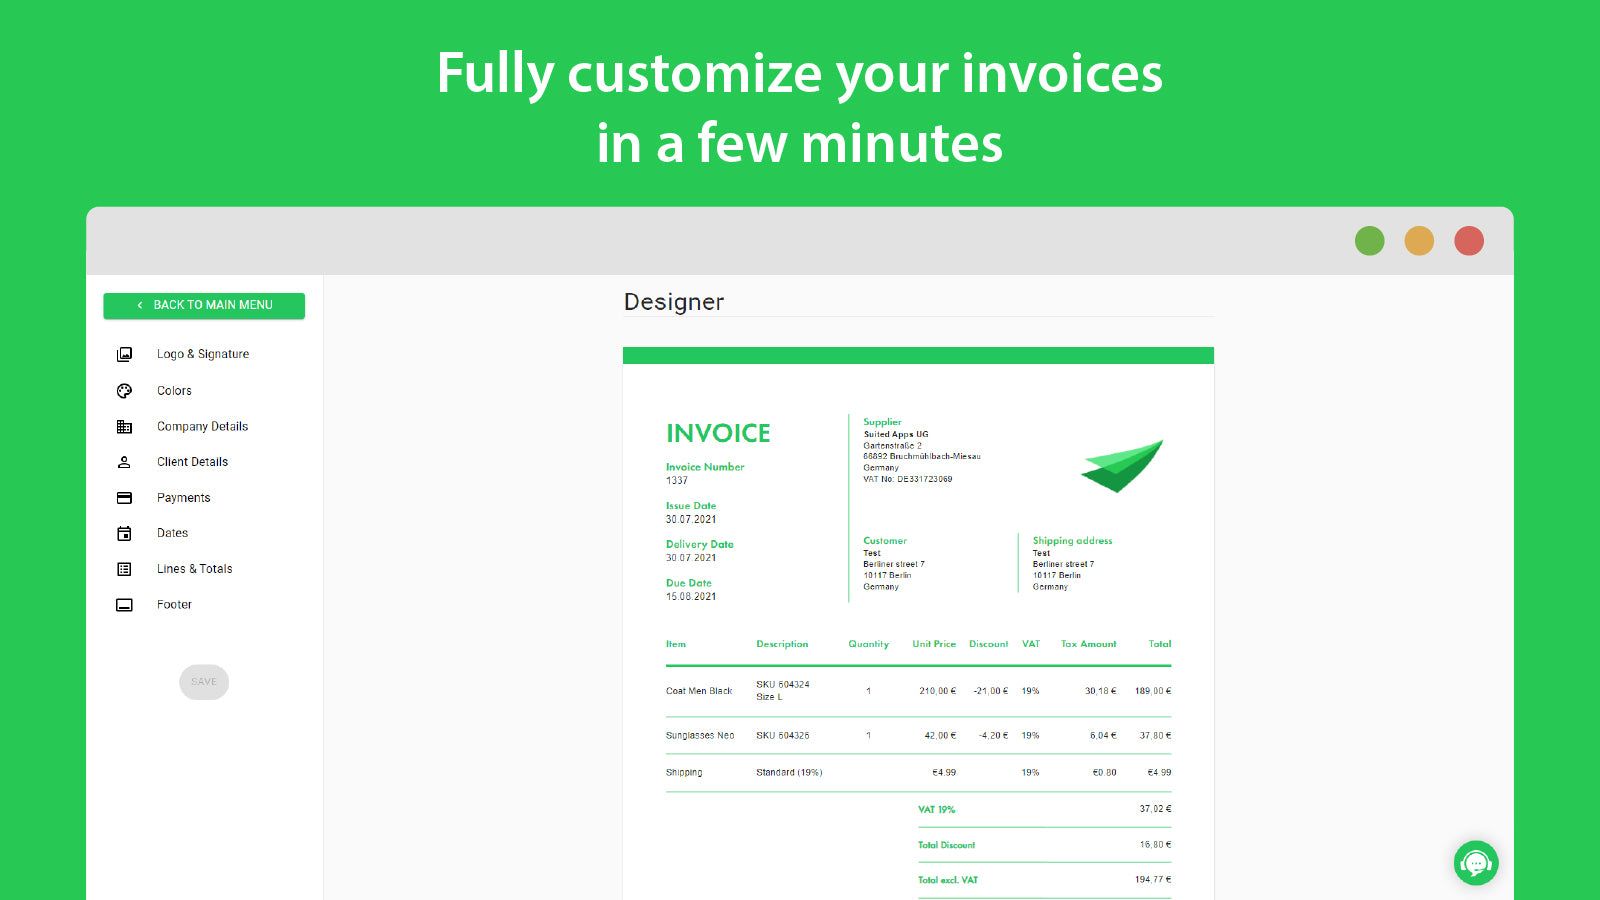 Fully customize your invoices in a few minutes